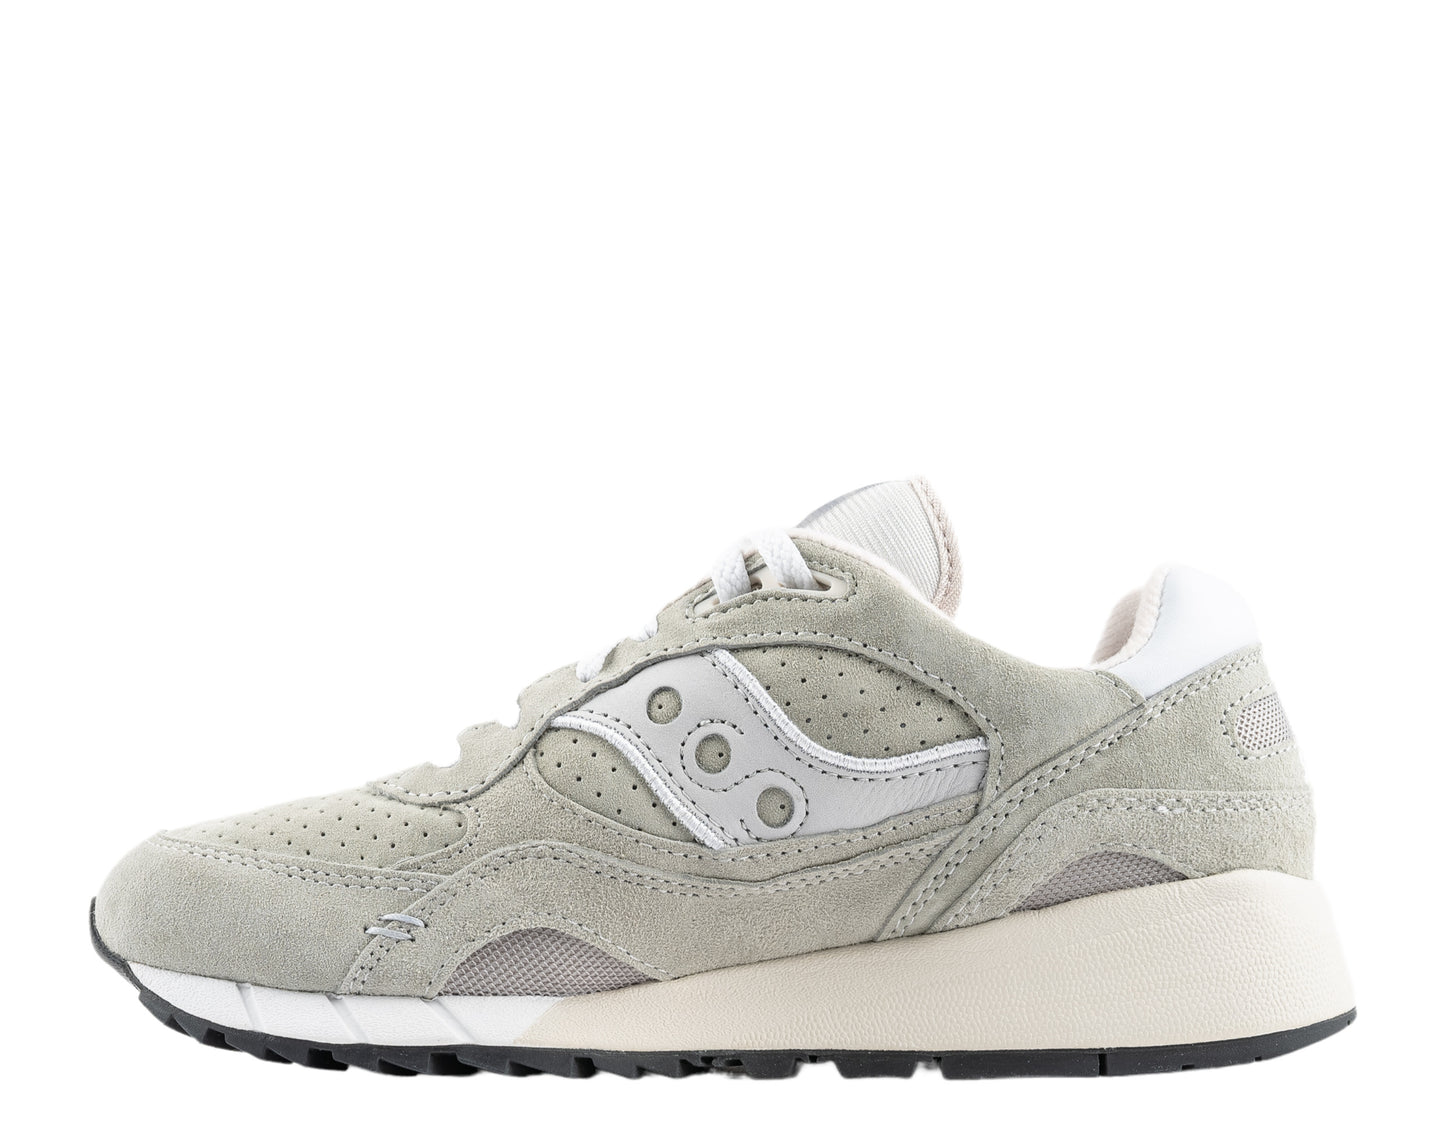 Saucony Originals Shadow 6000 - Full Suede Pack - Running Shoes